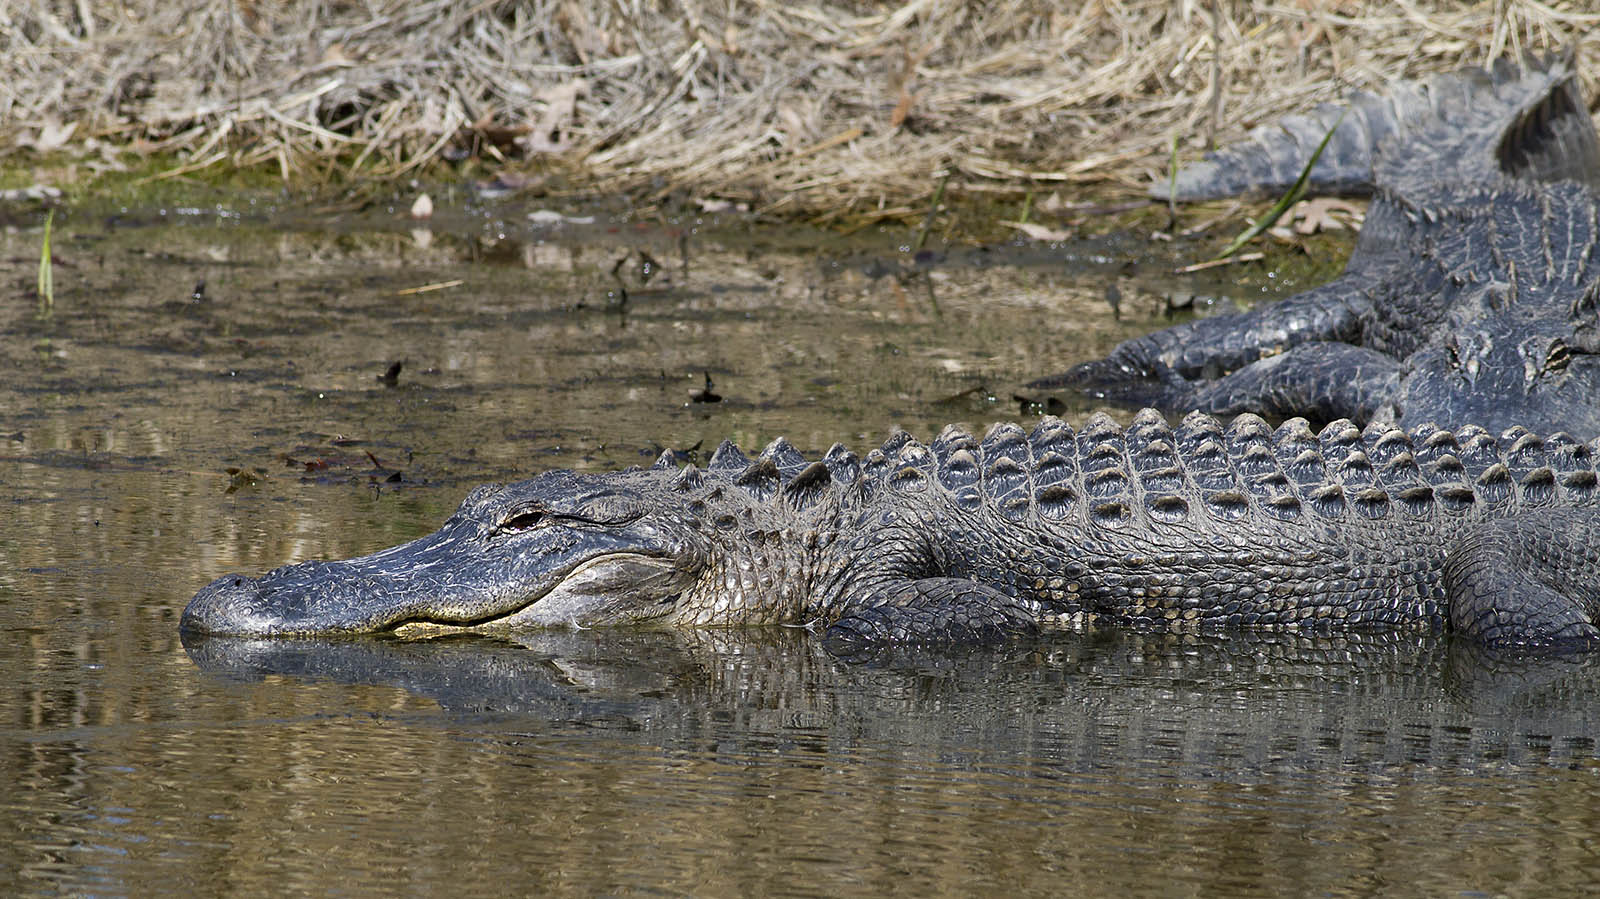 alligators in the ace basin on the bank of a river